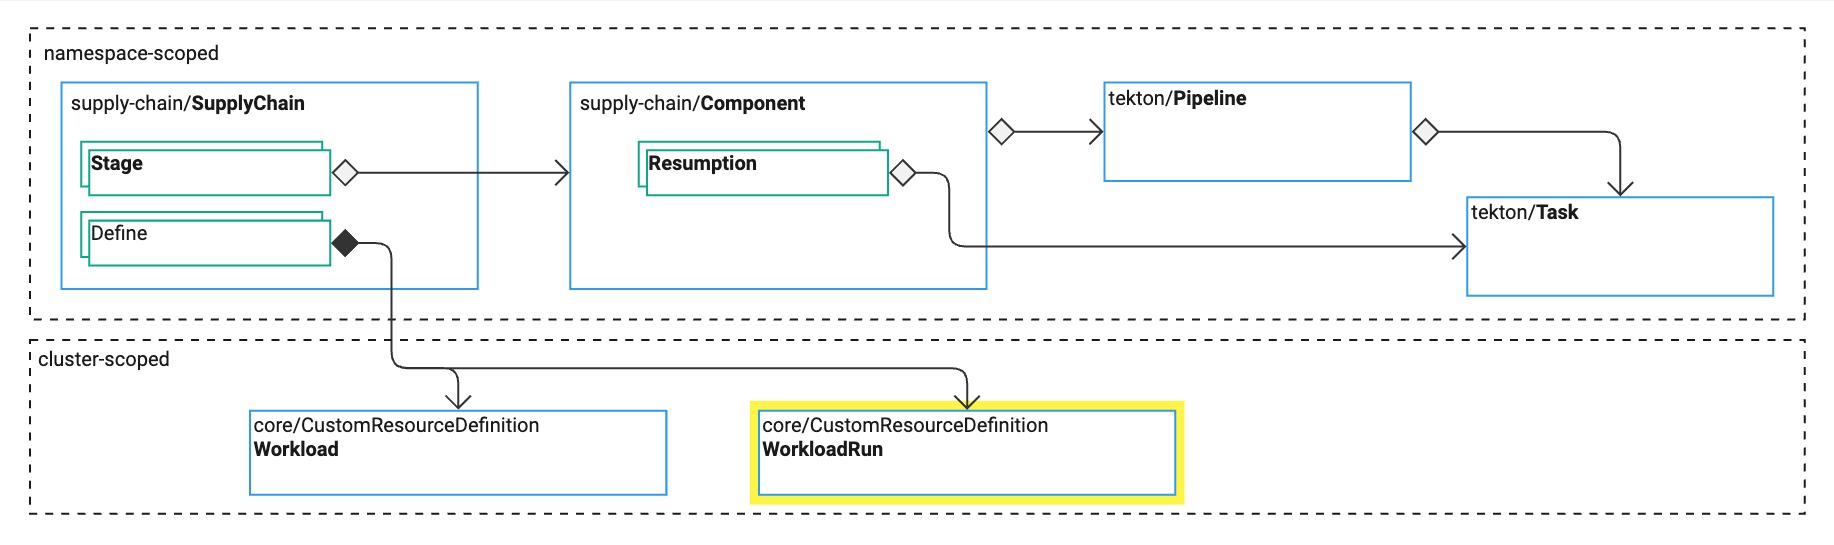 Diagram of the relationships between key Tanzu Supply Chain resources. Some resources are grouped together as namespace-scoped. Other resources are grouped together as cluster-scoped.